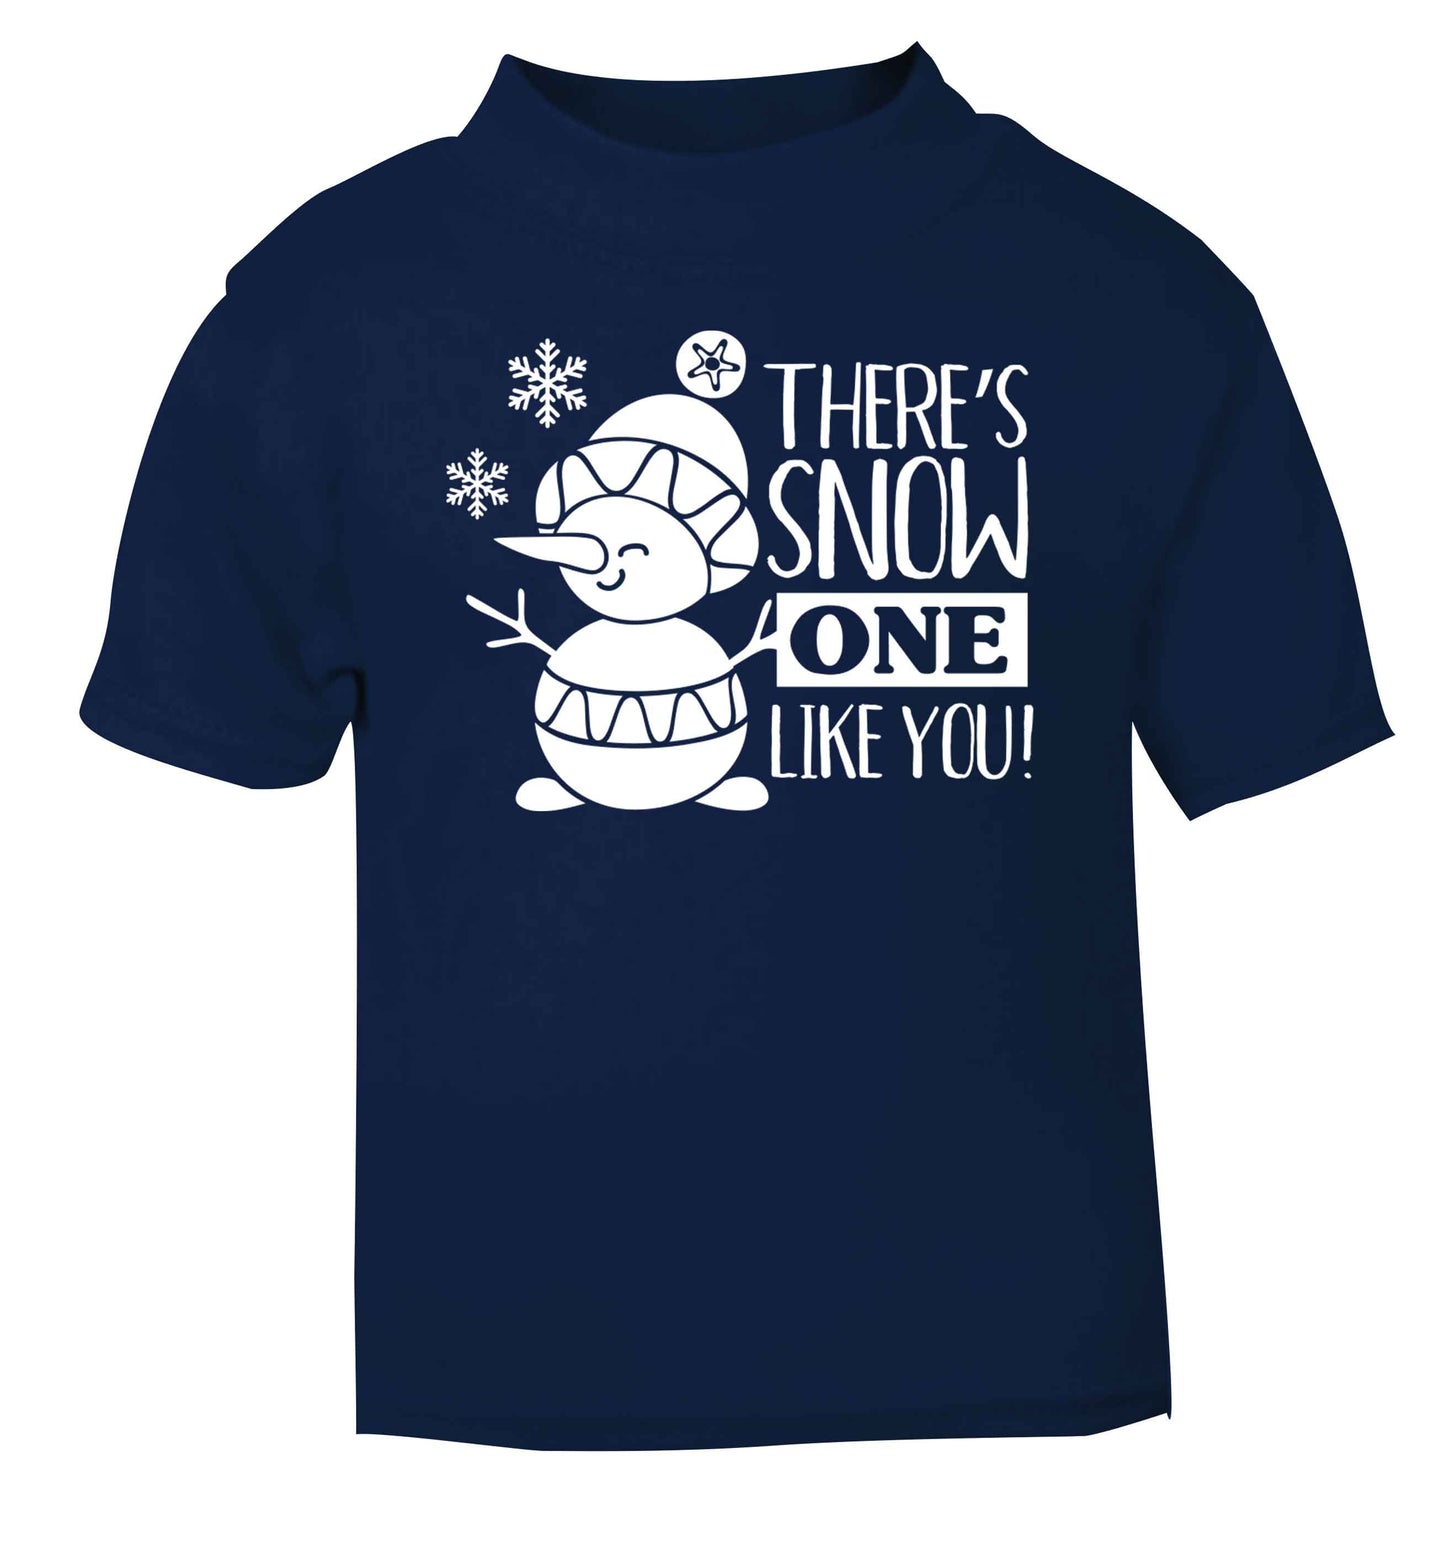 There's snow one like you navy baby toddler Tshirt 2 Years